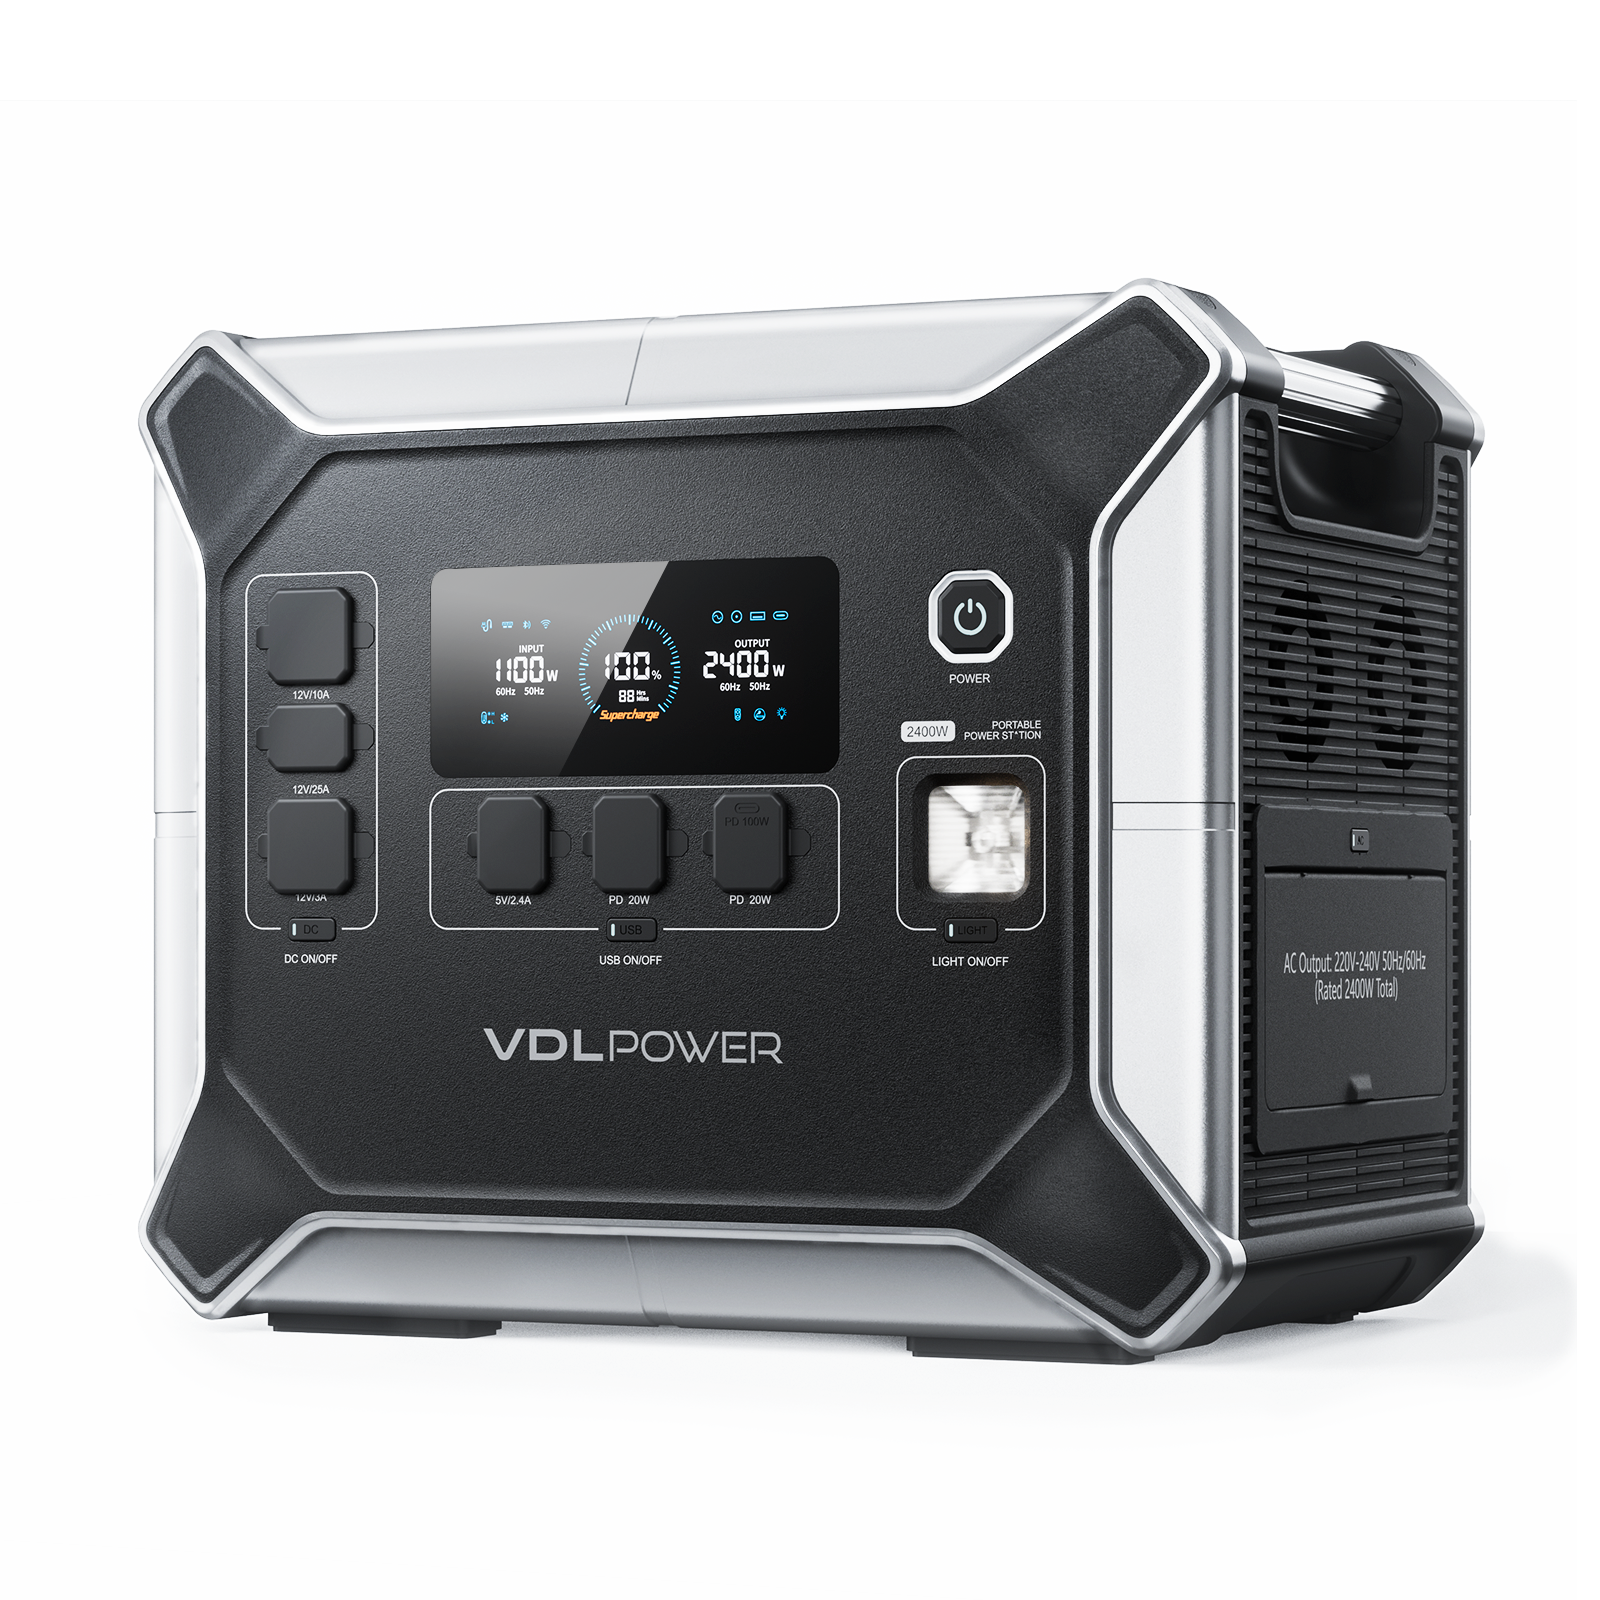 VDLPOWER HS2400 Portable Power Station 2048Wh/2400W LiFePO4 Battery for Home Backup